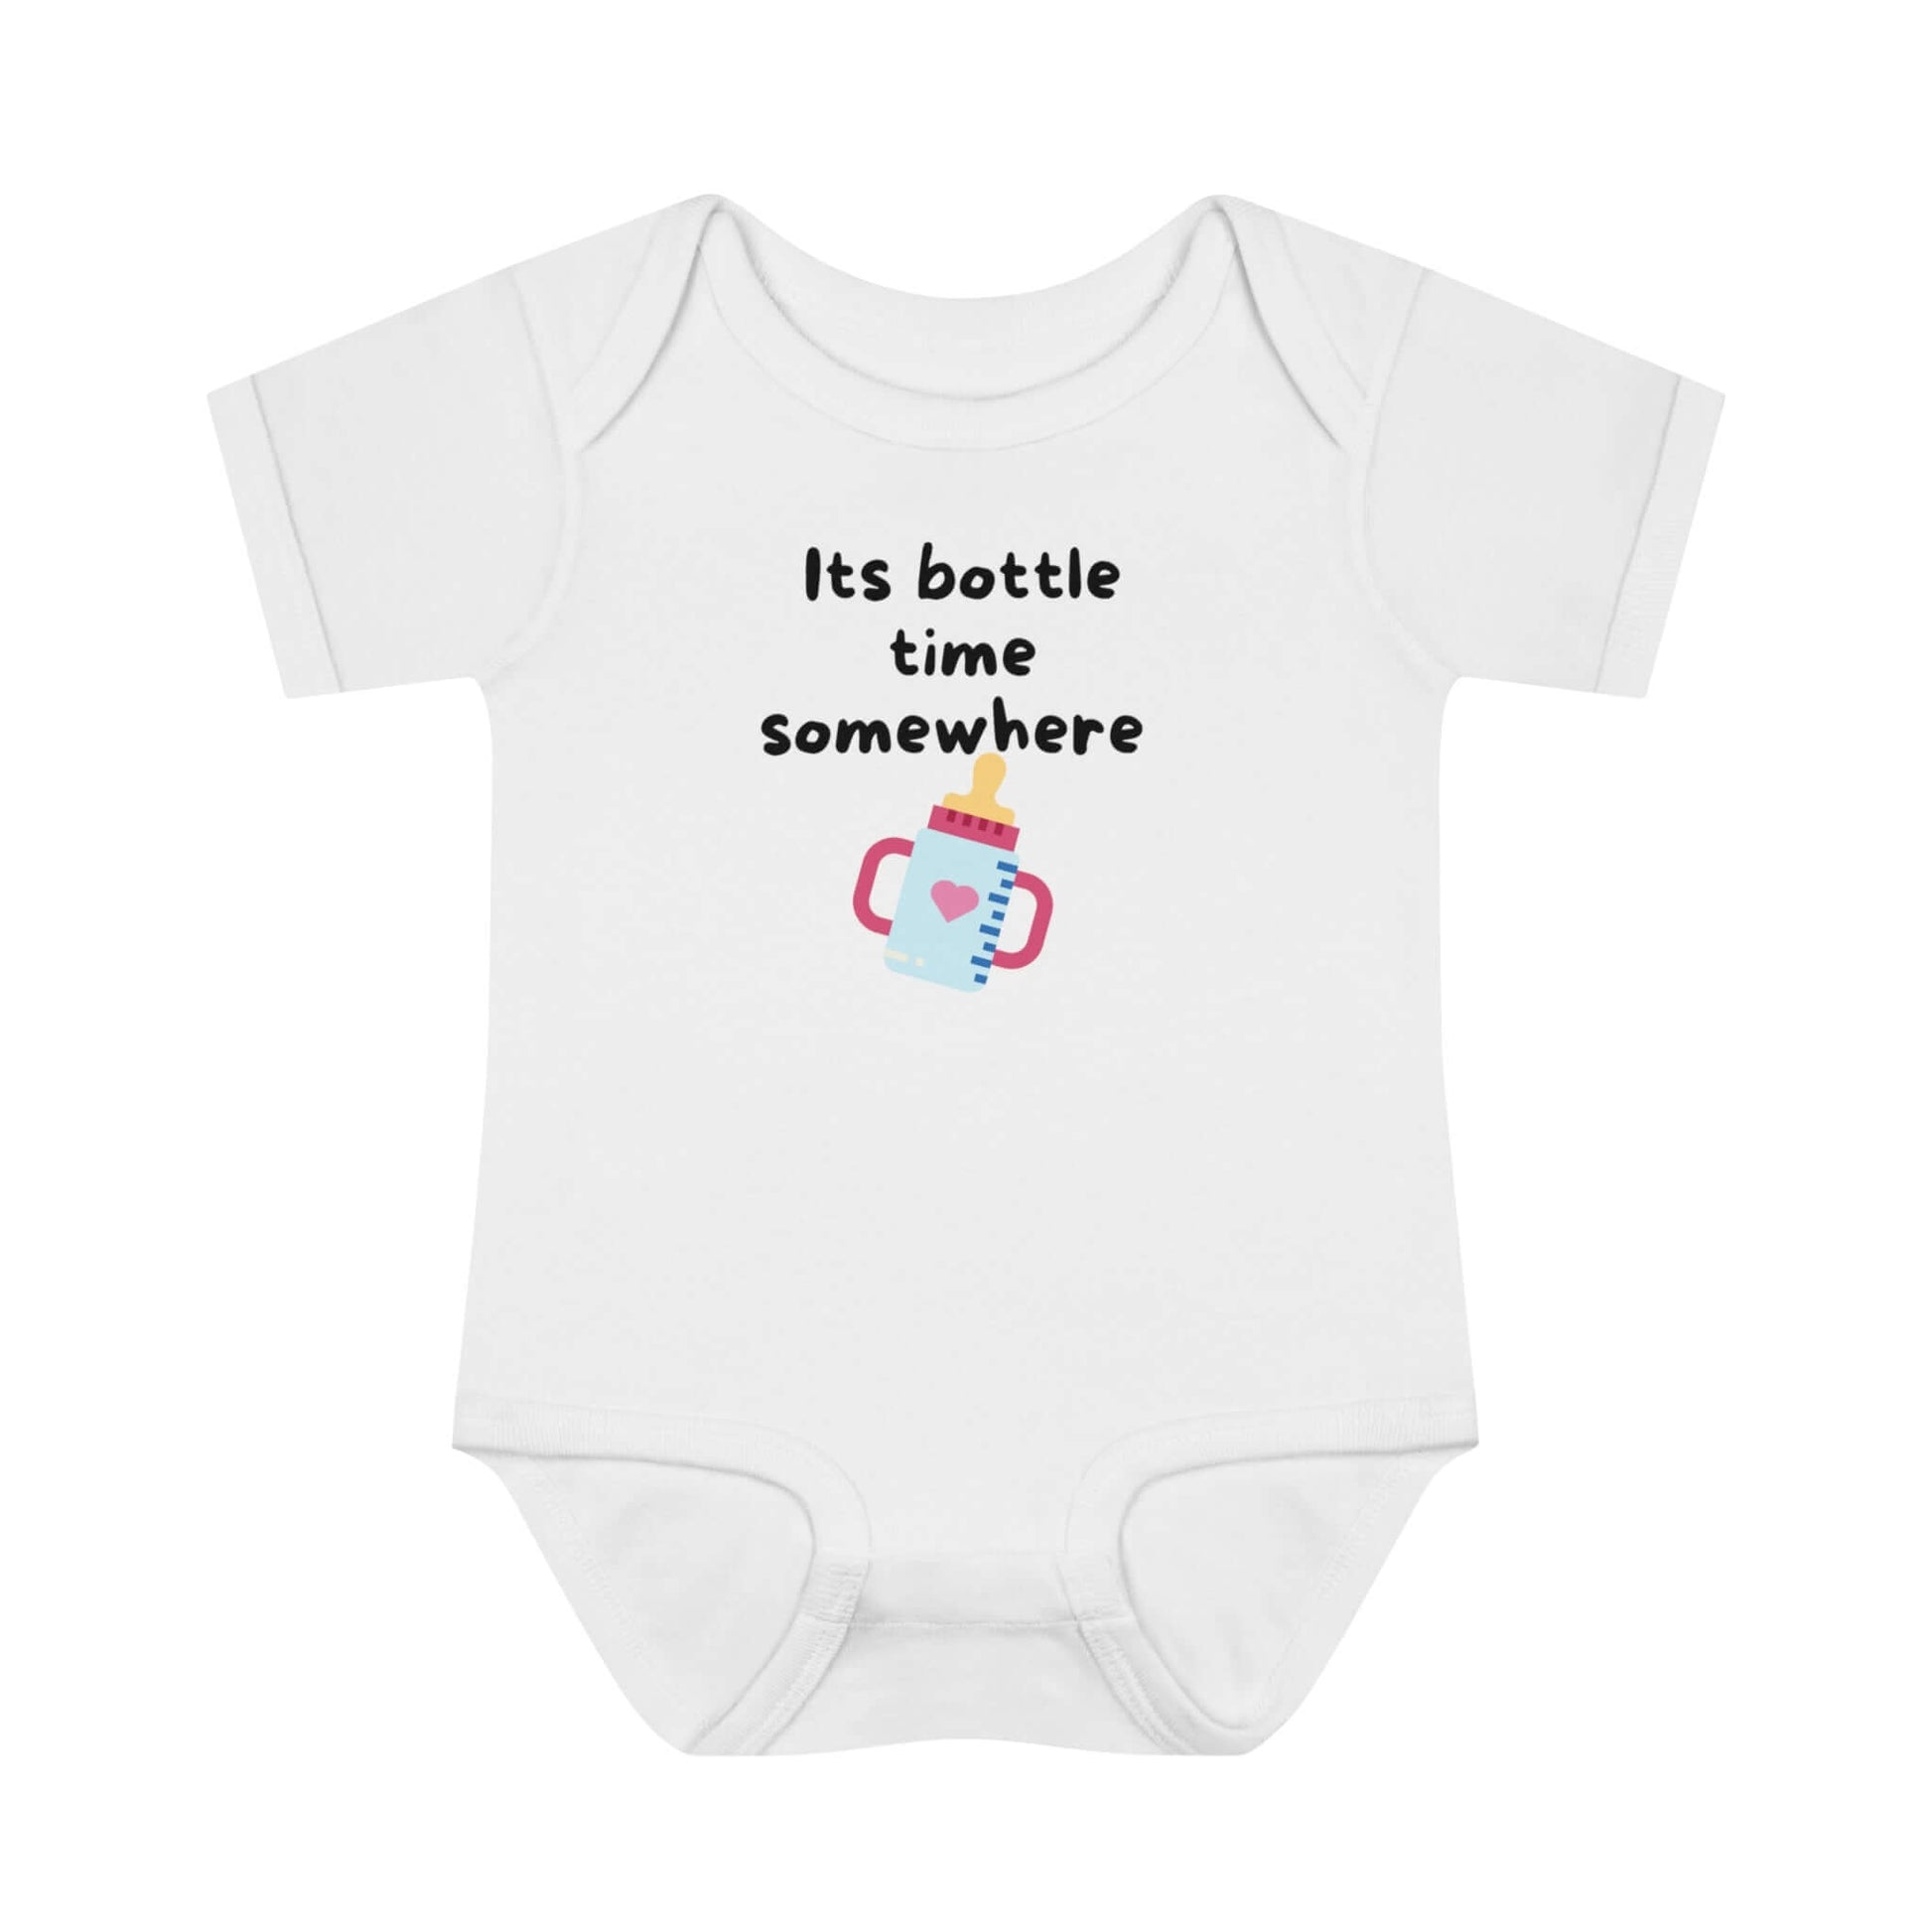 Baby bottle, Baby Clothing, Baby girl, Bodysuits, Bottle time, Cotton, Cute baby clothing, DTG, Funny baby gift, Funny baby onesie, Funnyonesie, Kids' Clothing, Neck Labels, Onesies, Regular fit